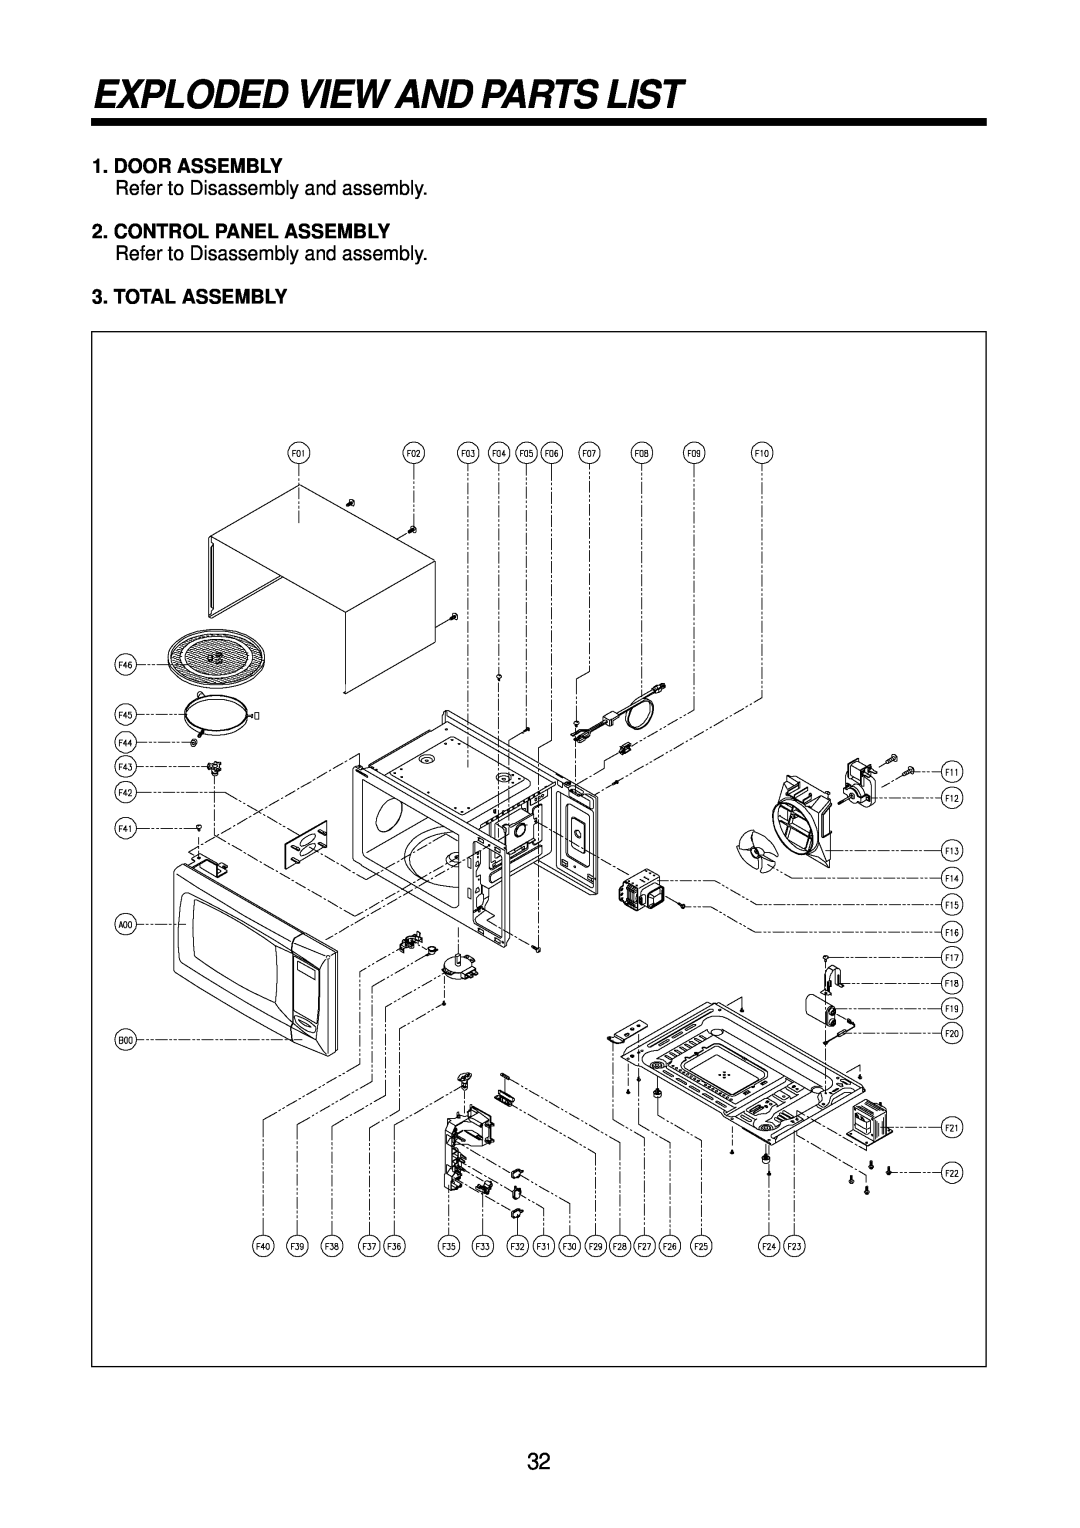 Daewoo KOR-861G0A Exploded View And Parts List, Door Assembly, Refer to Disassembly and assembly, Total Assembly 